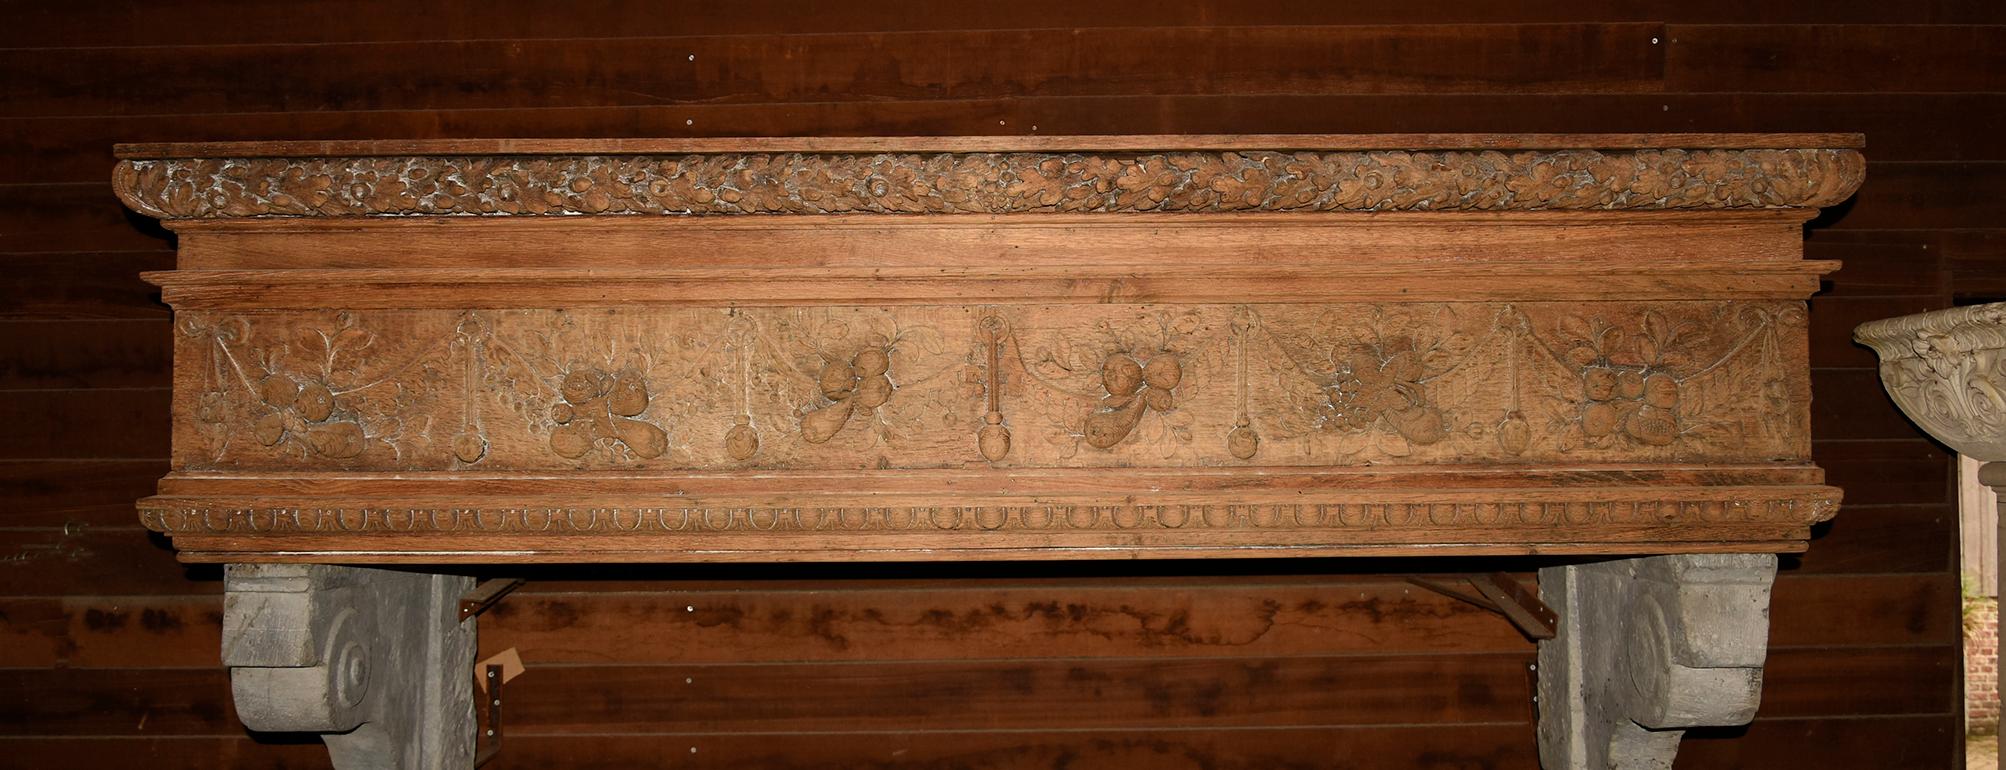 Dutch Antique Fireplace Mantel from the 19h Century